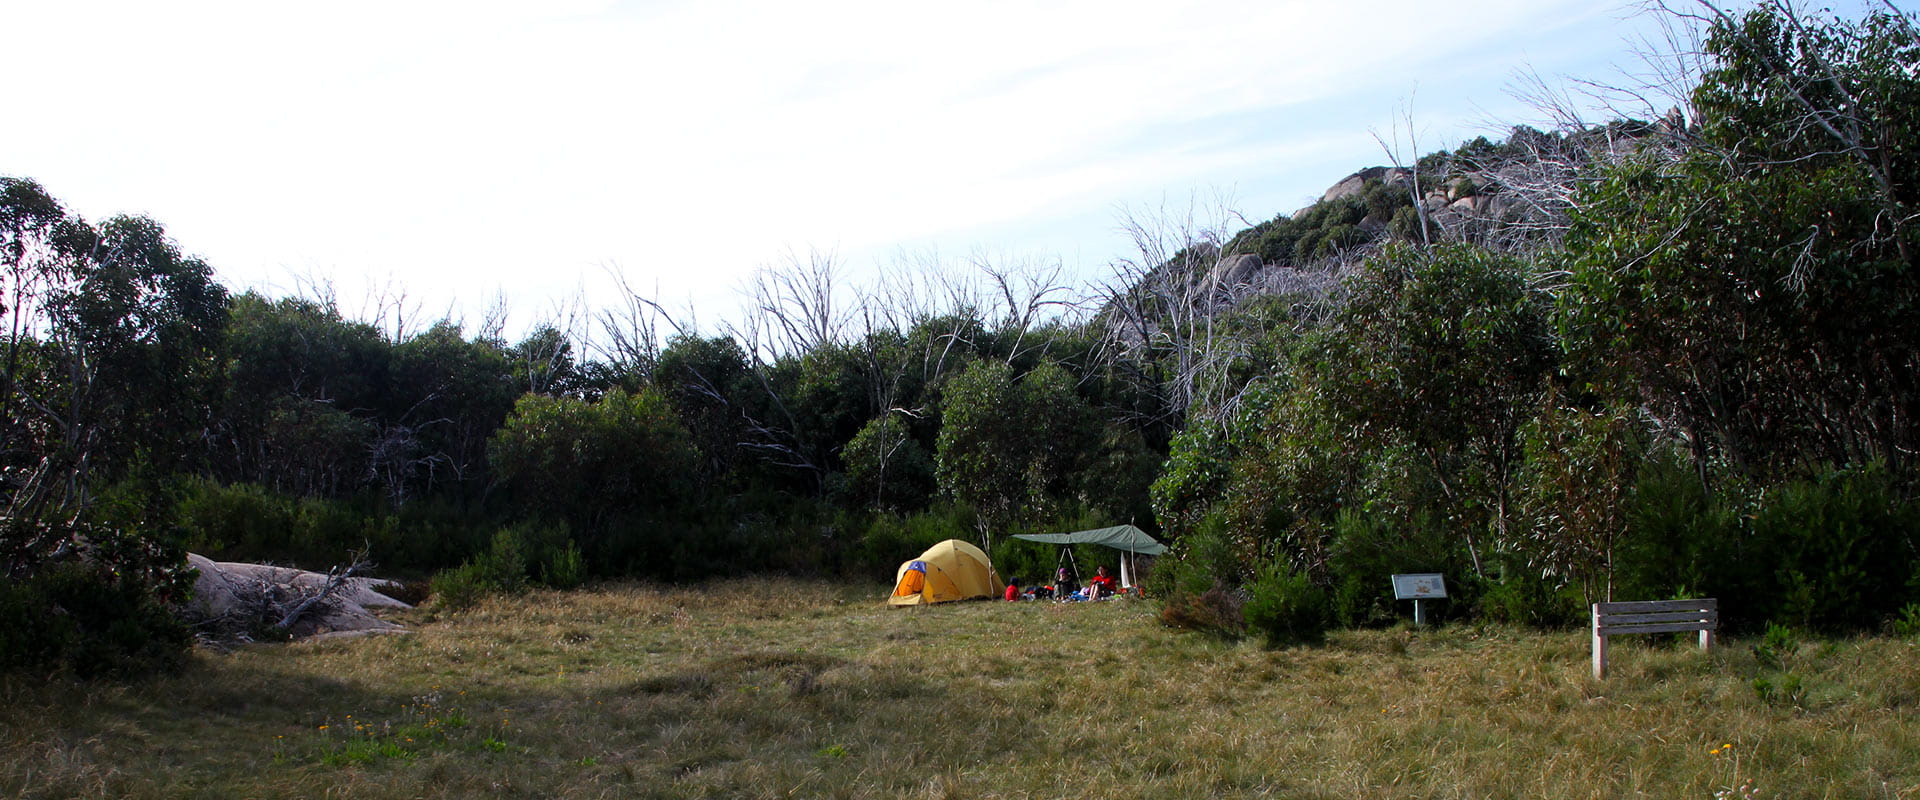 A yellow tent and tarp shelter is pitched in a clearing in front of some alpine shrubs